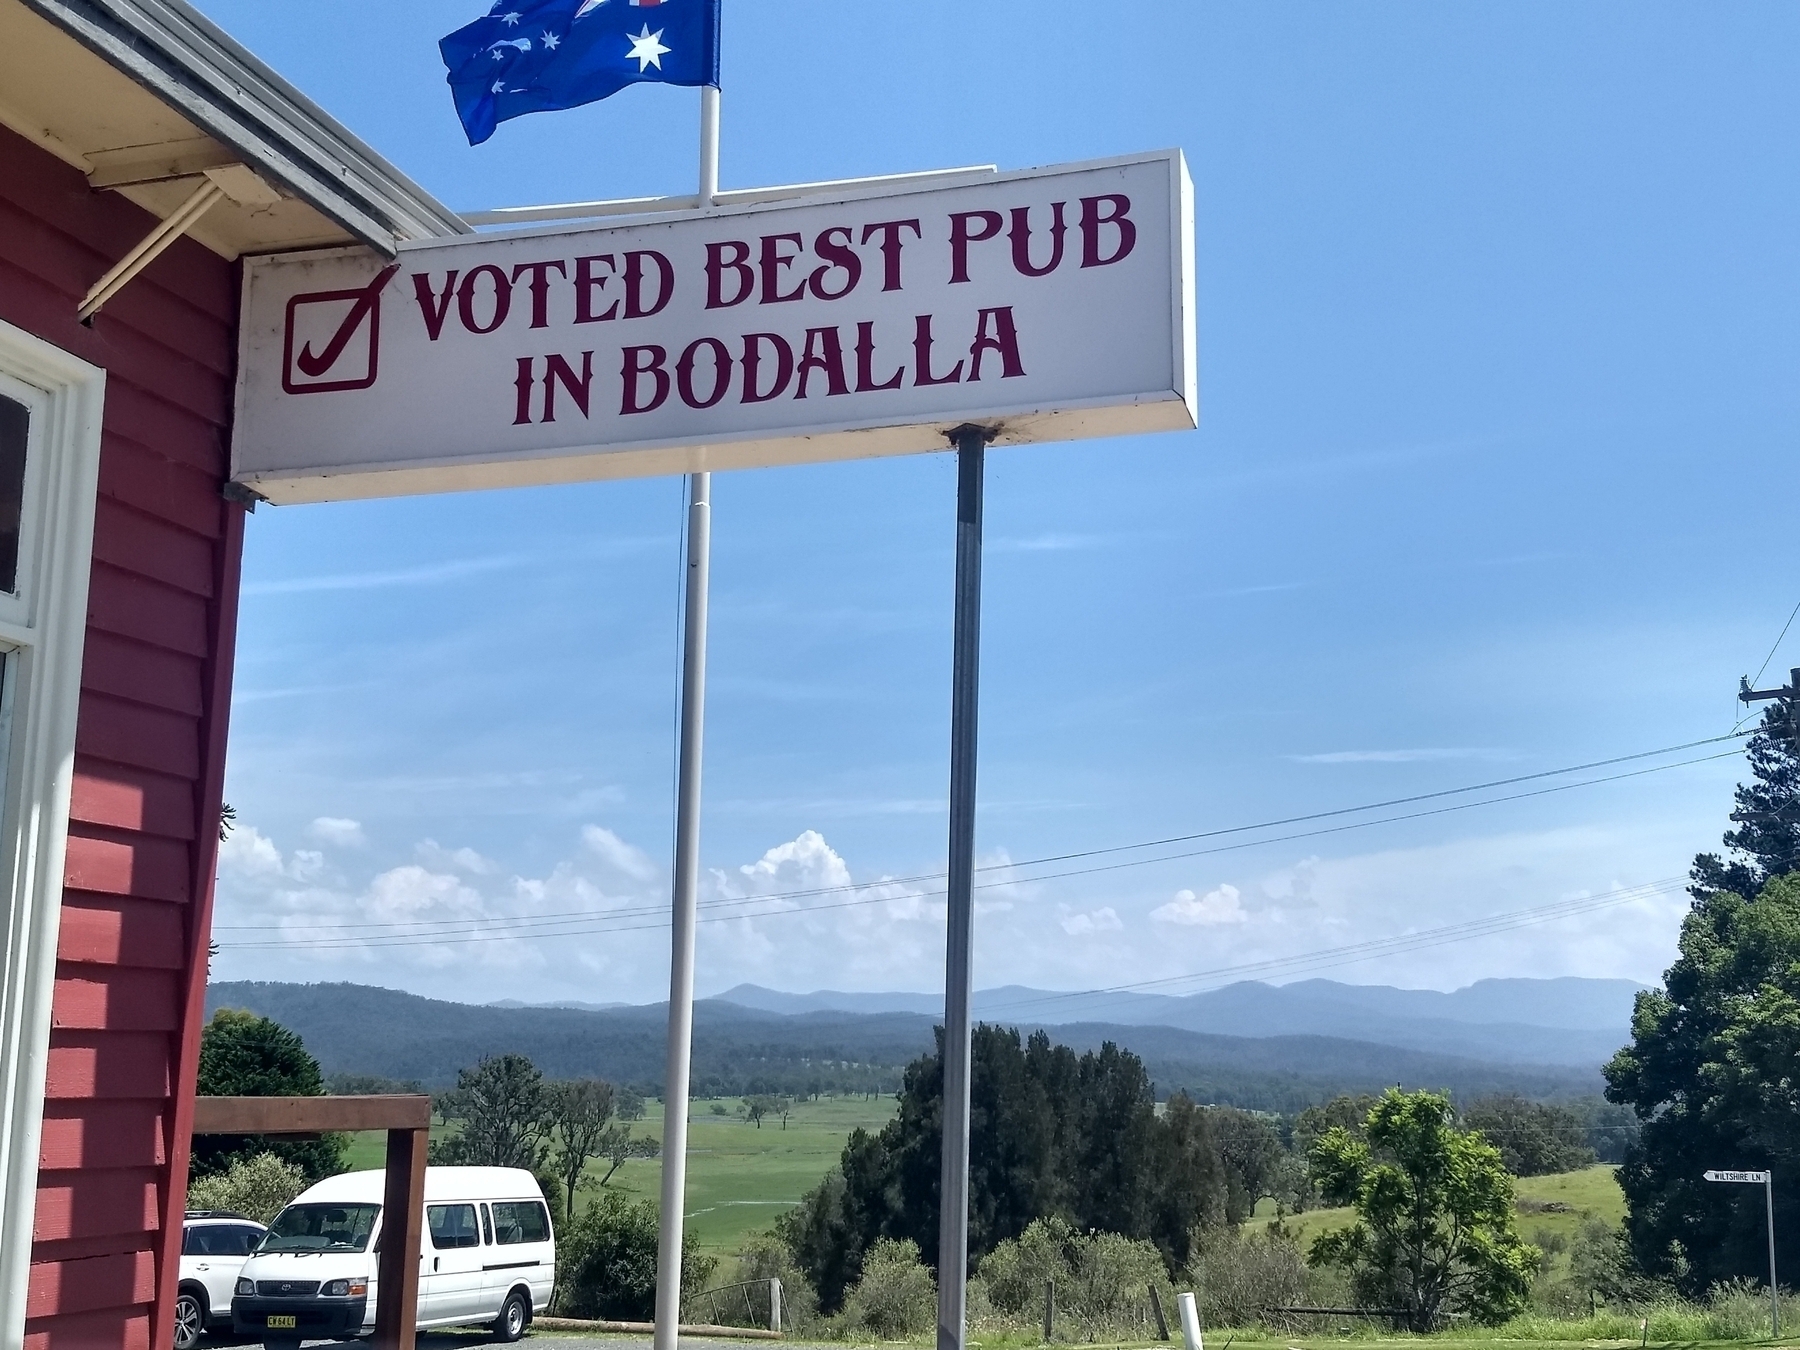 A view of green paddocks and distant forested hills from the verandah of a country pub on the South coast of NSW. A sign reads: Voted best pub in Bodalla. The Australian flag flies above.